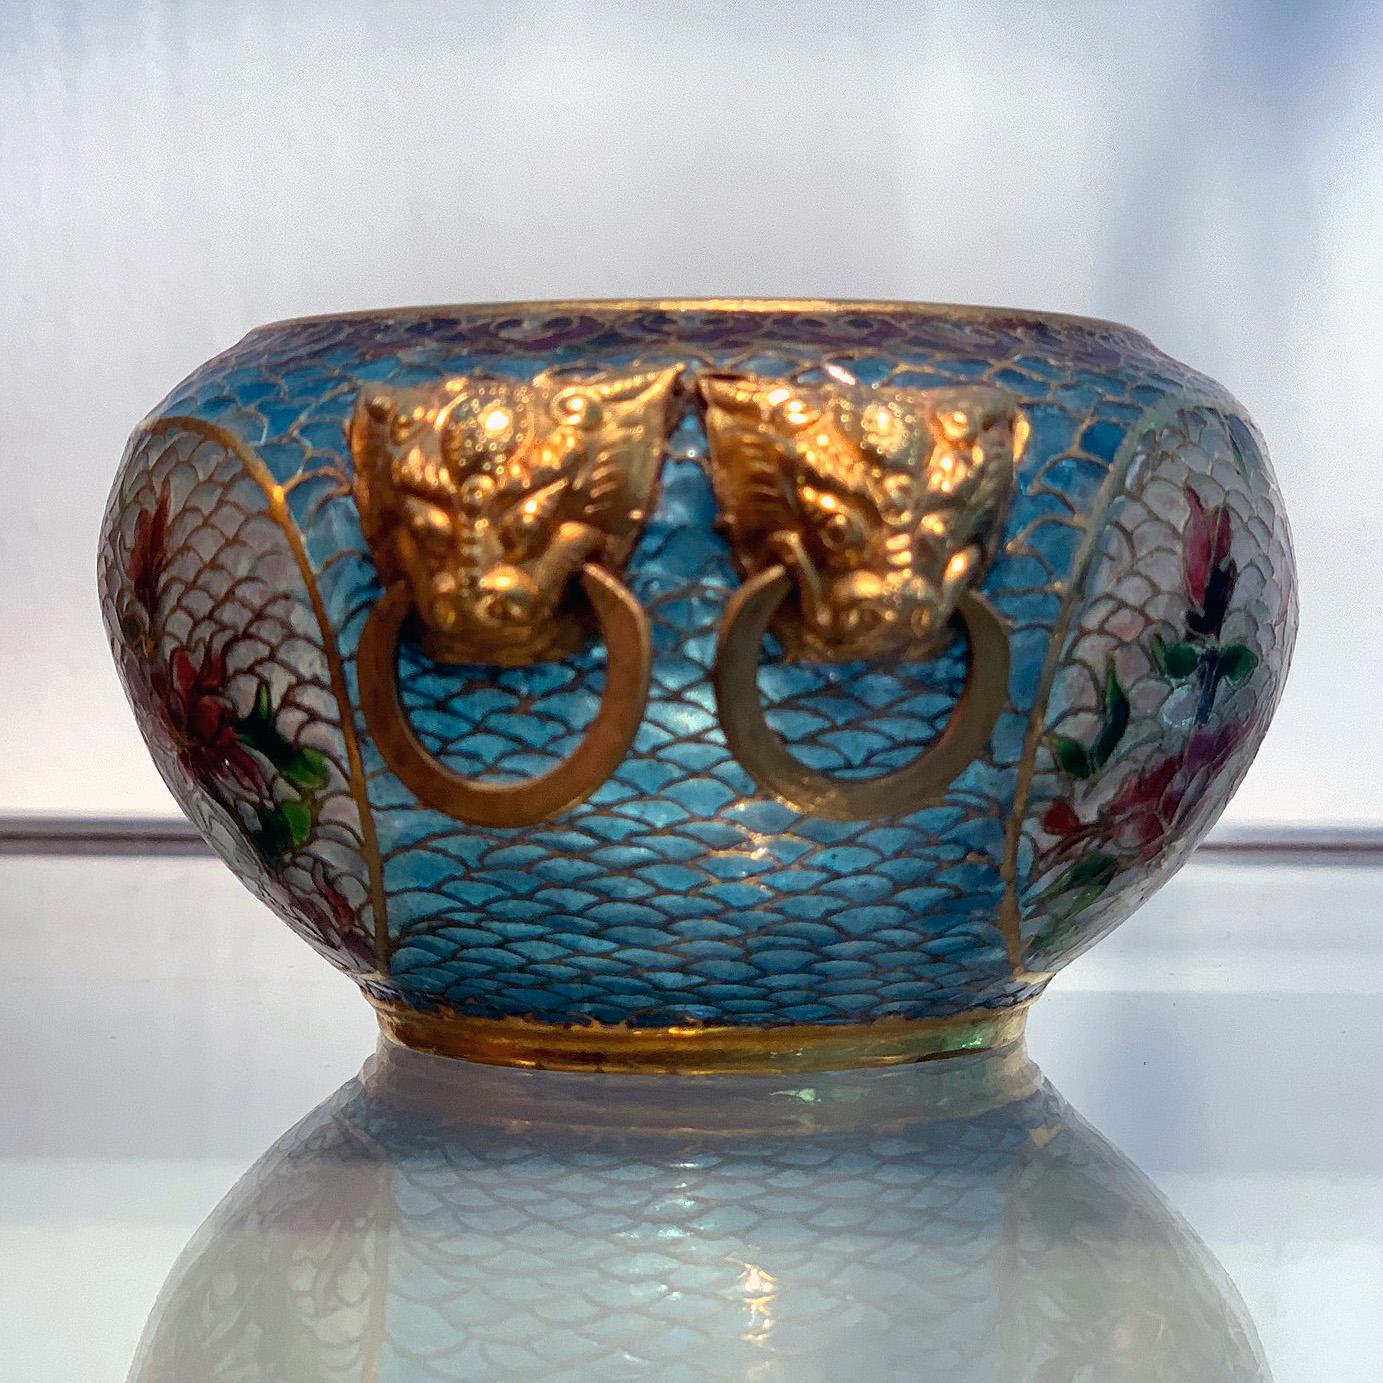 A small Chinese cloisonné enamel bowl made with the technique of Plique-a-jour (means 